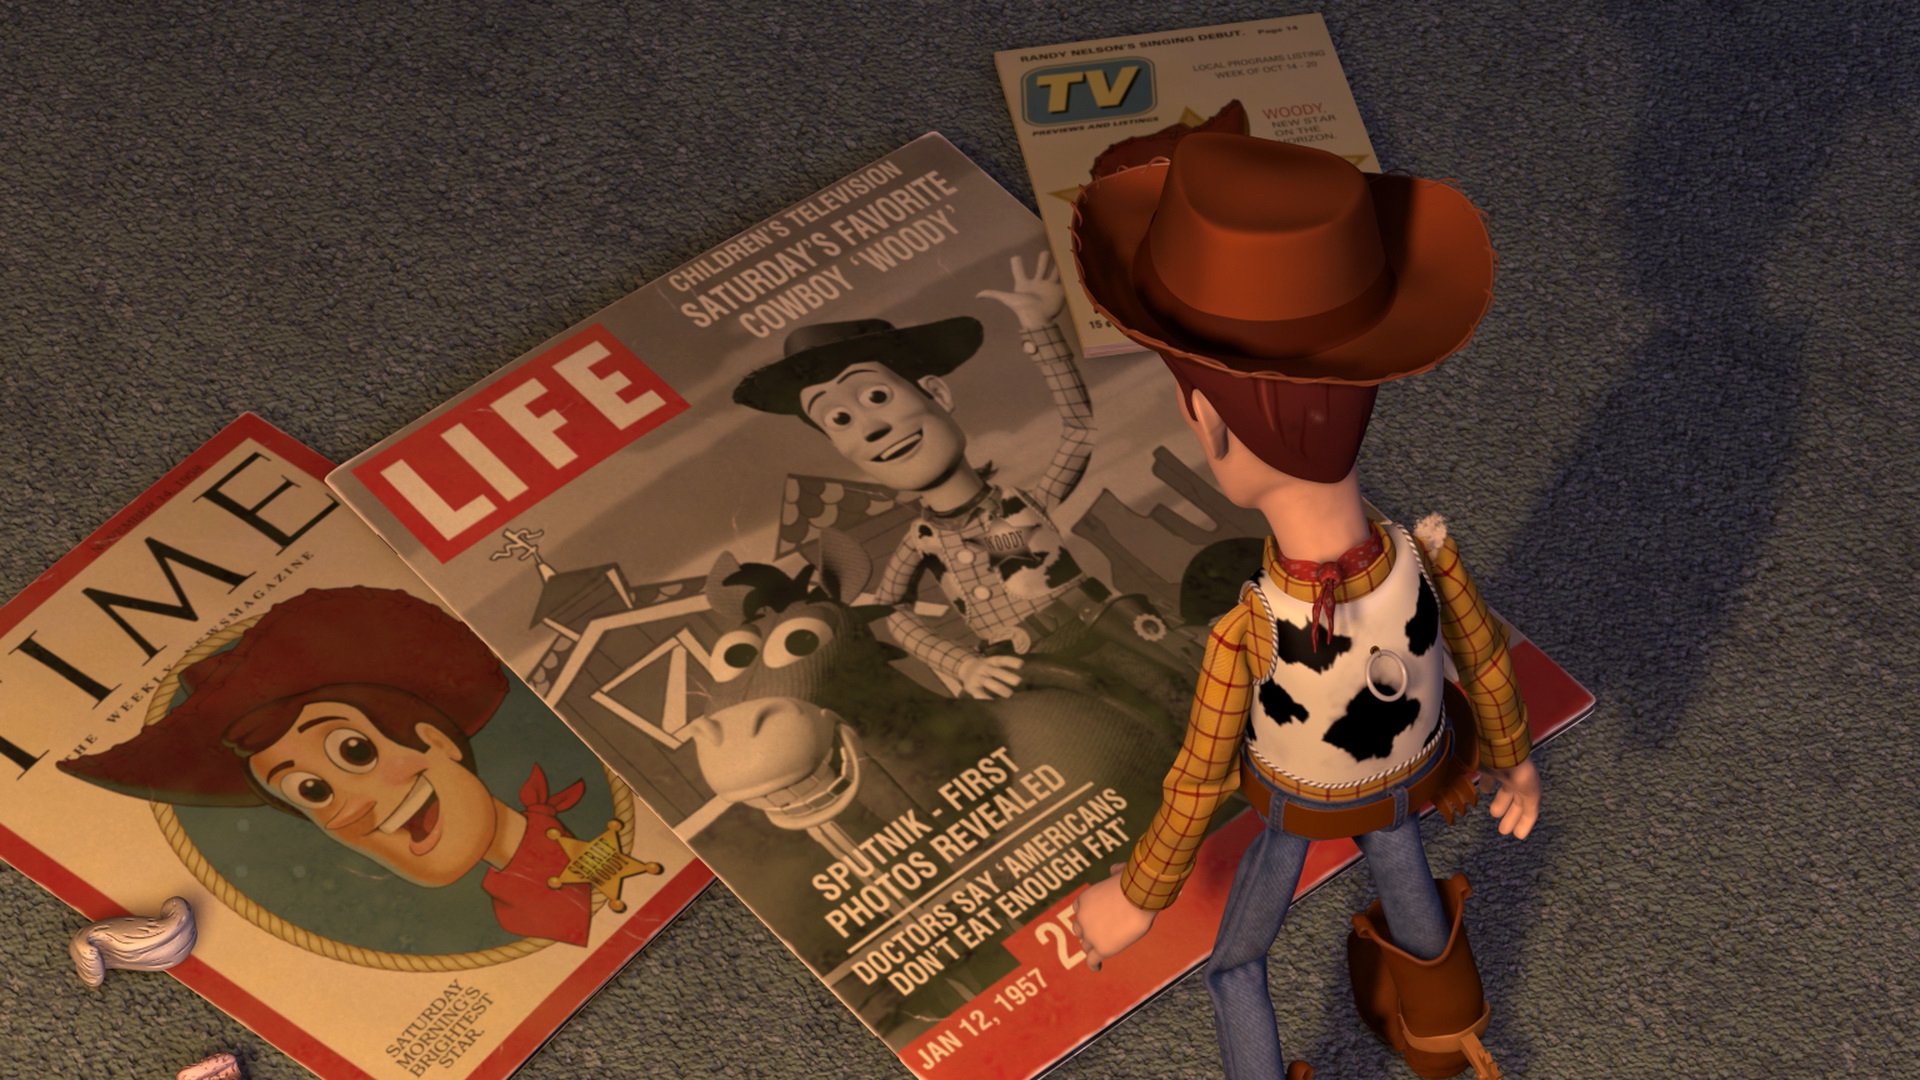 Movie Toy Story 2 Hd Wallpaper